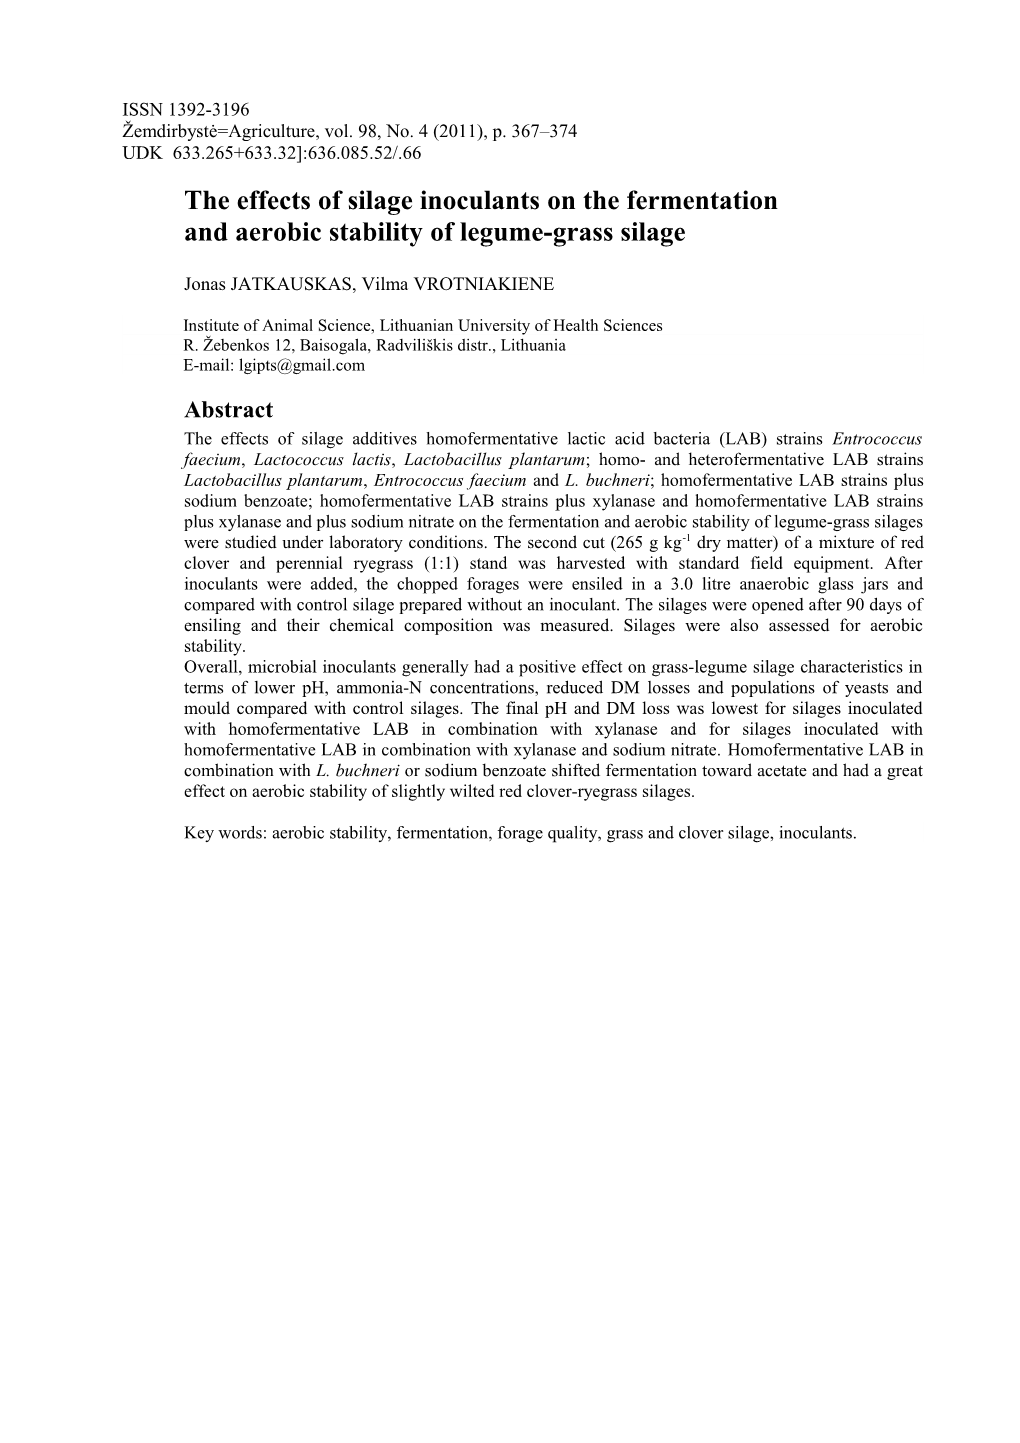 The Effects of Silage Inoculants on the Fermentation and Aerobic Stability of Legume-Grass